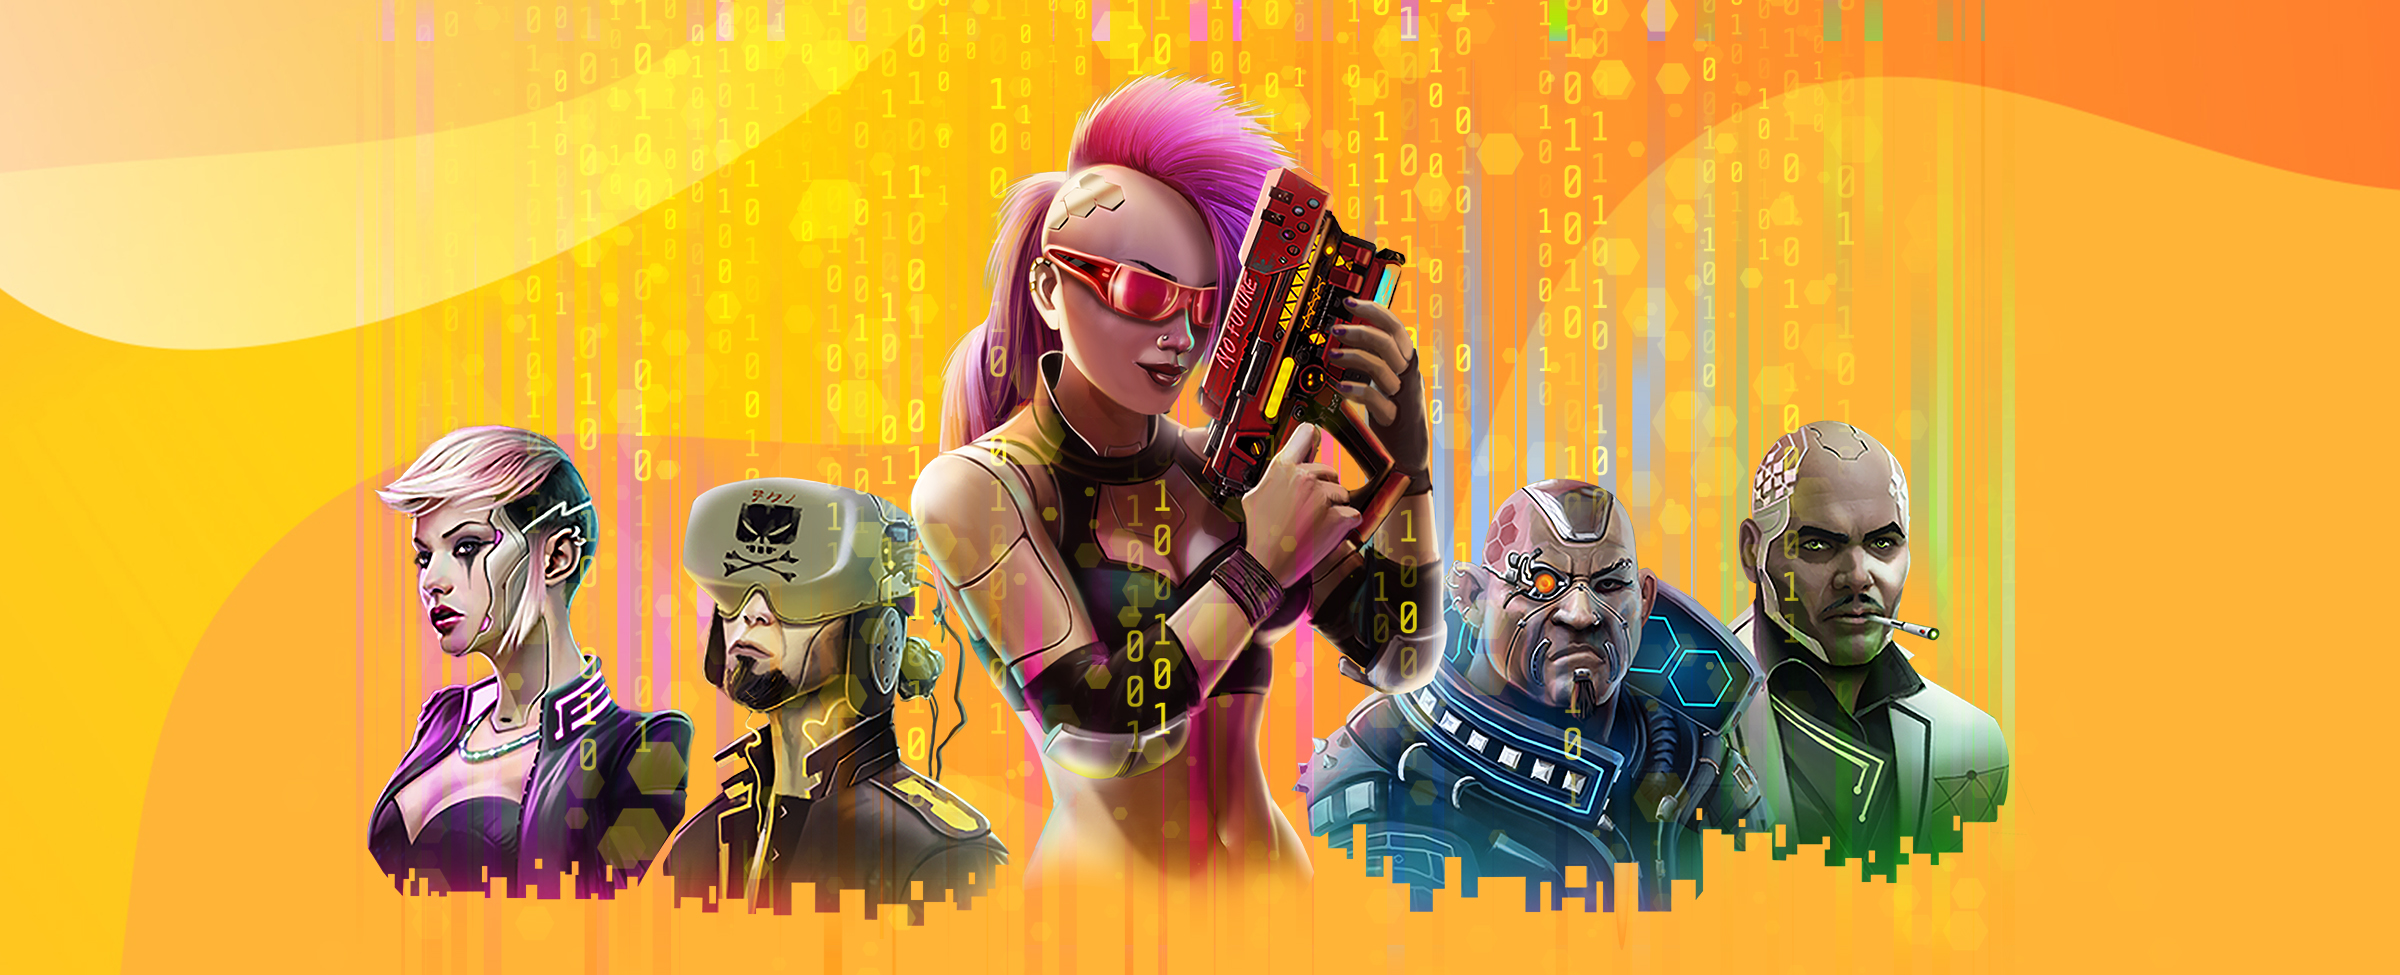 3D cartoon characters from the SlotsLV slot game Cyberpunk City are featured, including the central female cyborg character and other four gameplay characters